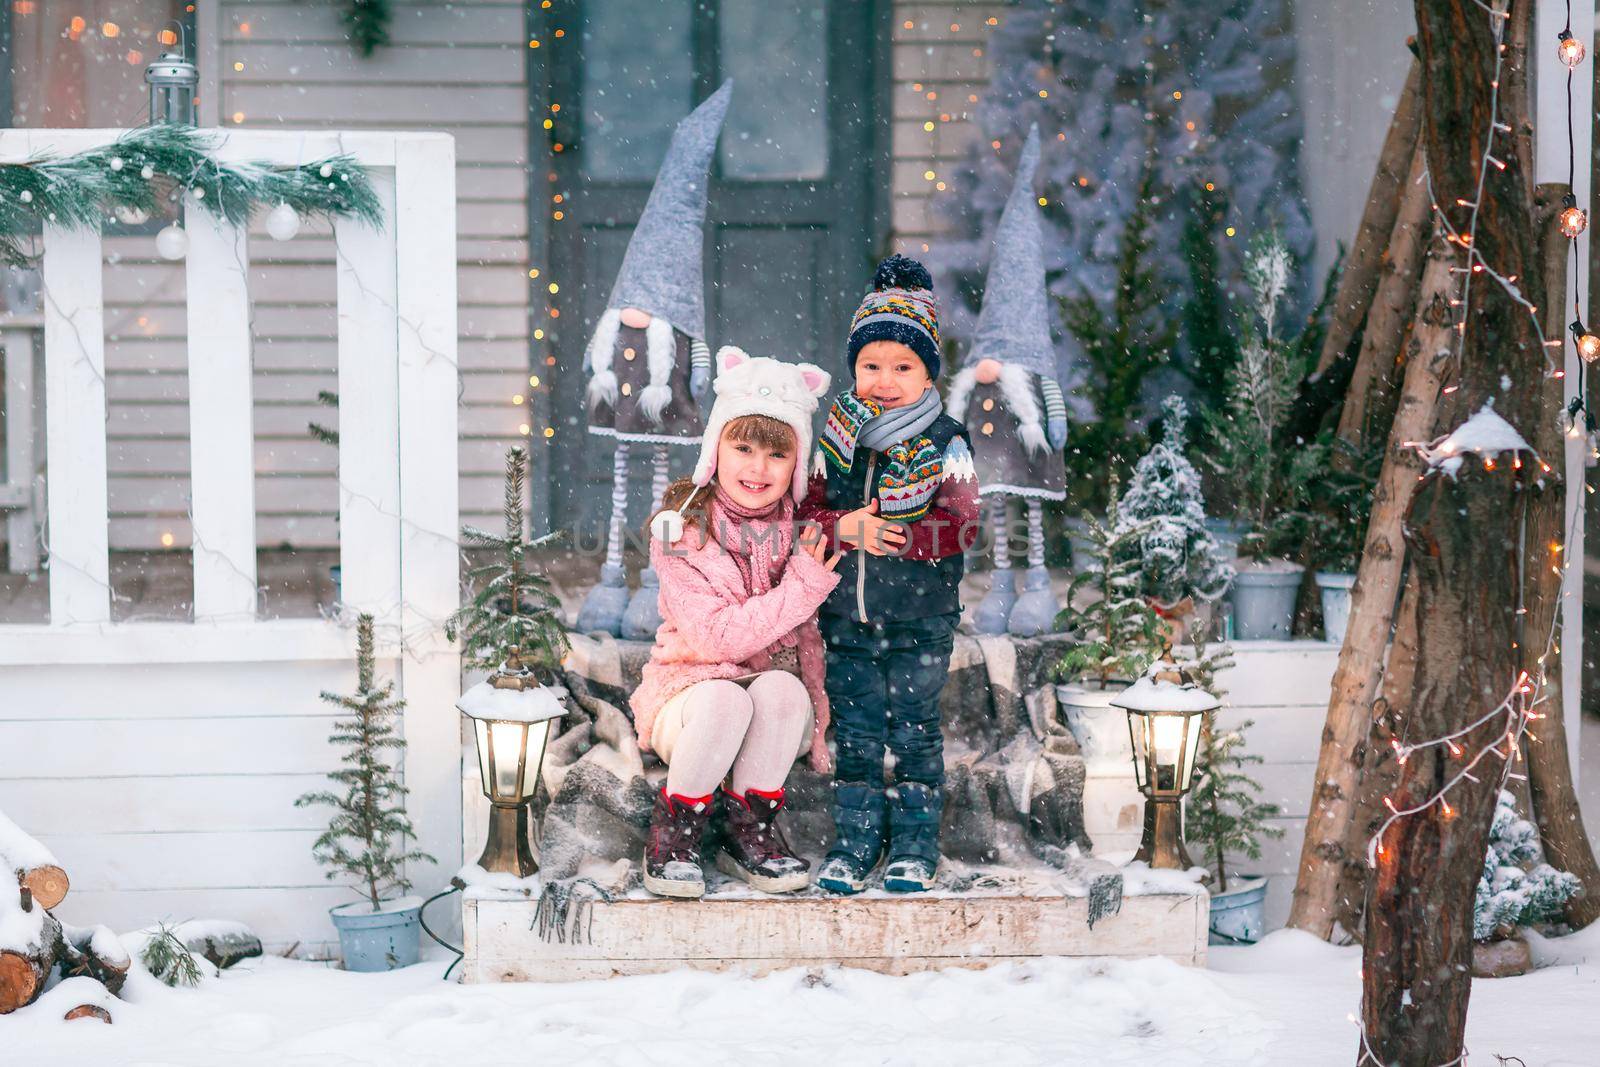 Happy little kids sitting on the porch of the Christmas decorated house outdoor by Len44ik